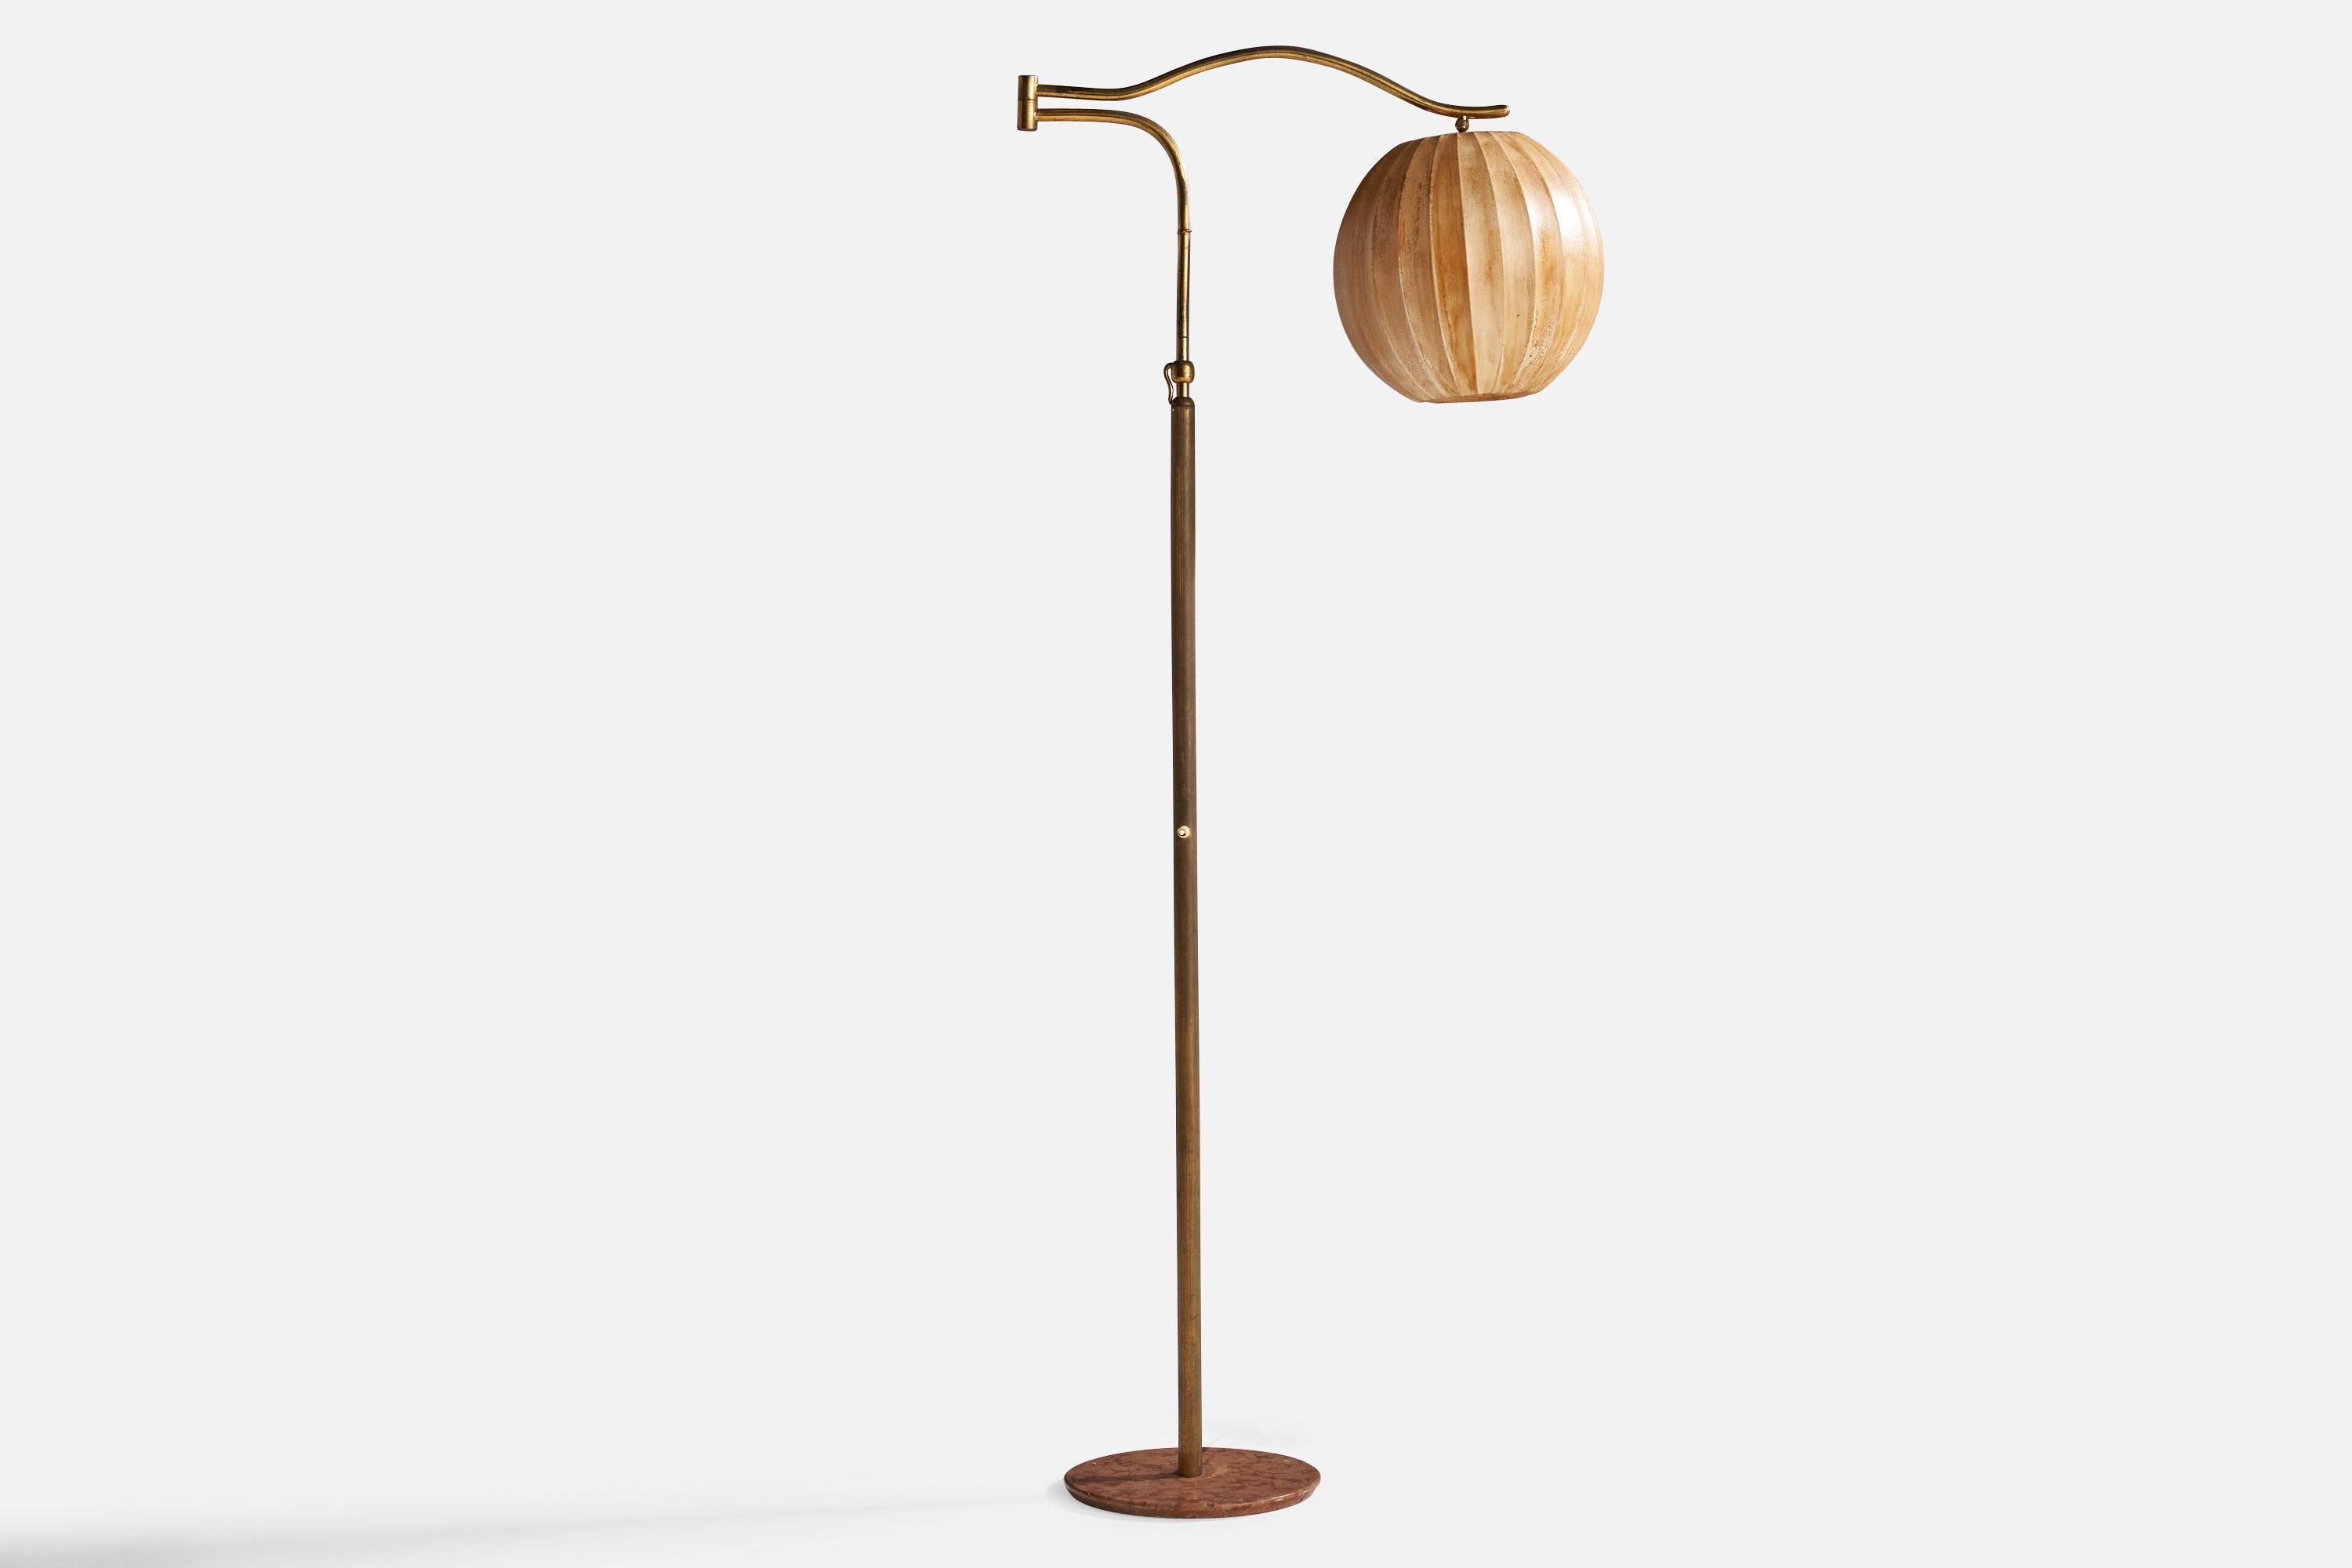 An adjustable brass, waxed cotton and marble floor lamp designed and produced in Italy, 1940s.

Overall Dimensions (inches): 70” H x 12.5”  D
Stated dimensions include shade.
Bulb Specifications: E-26 Bulb
Number of Sockets: 1
All lighting will be